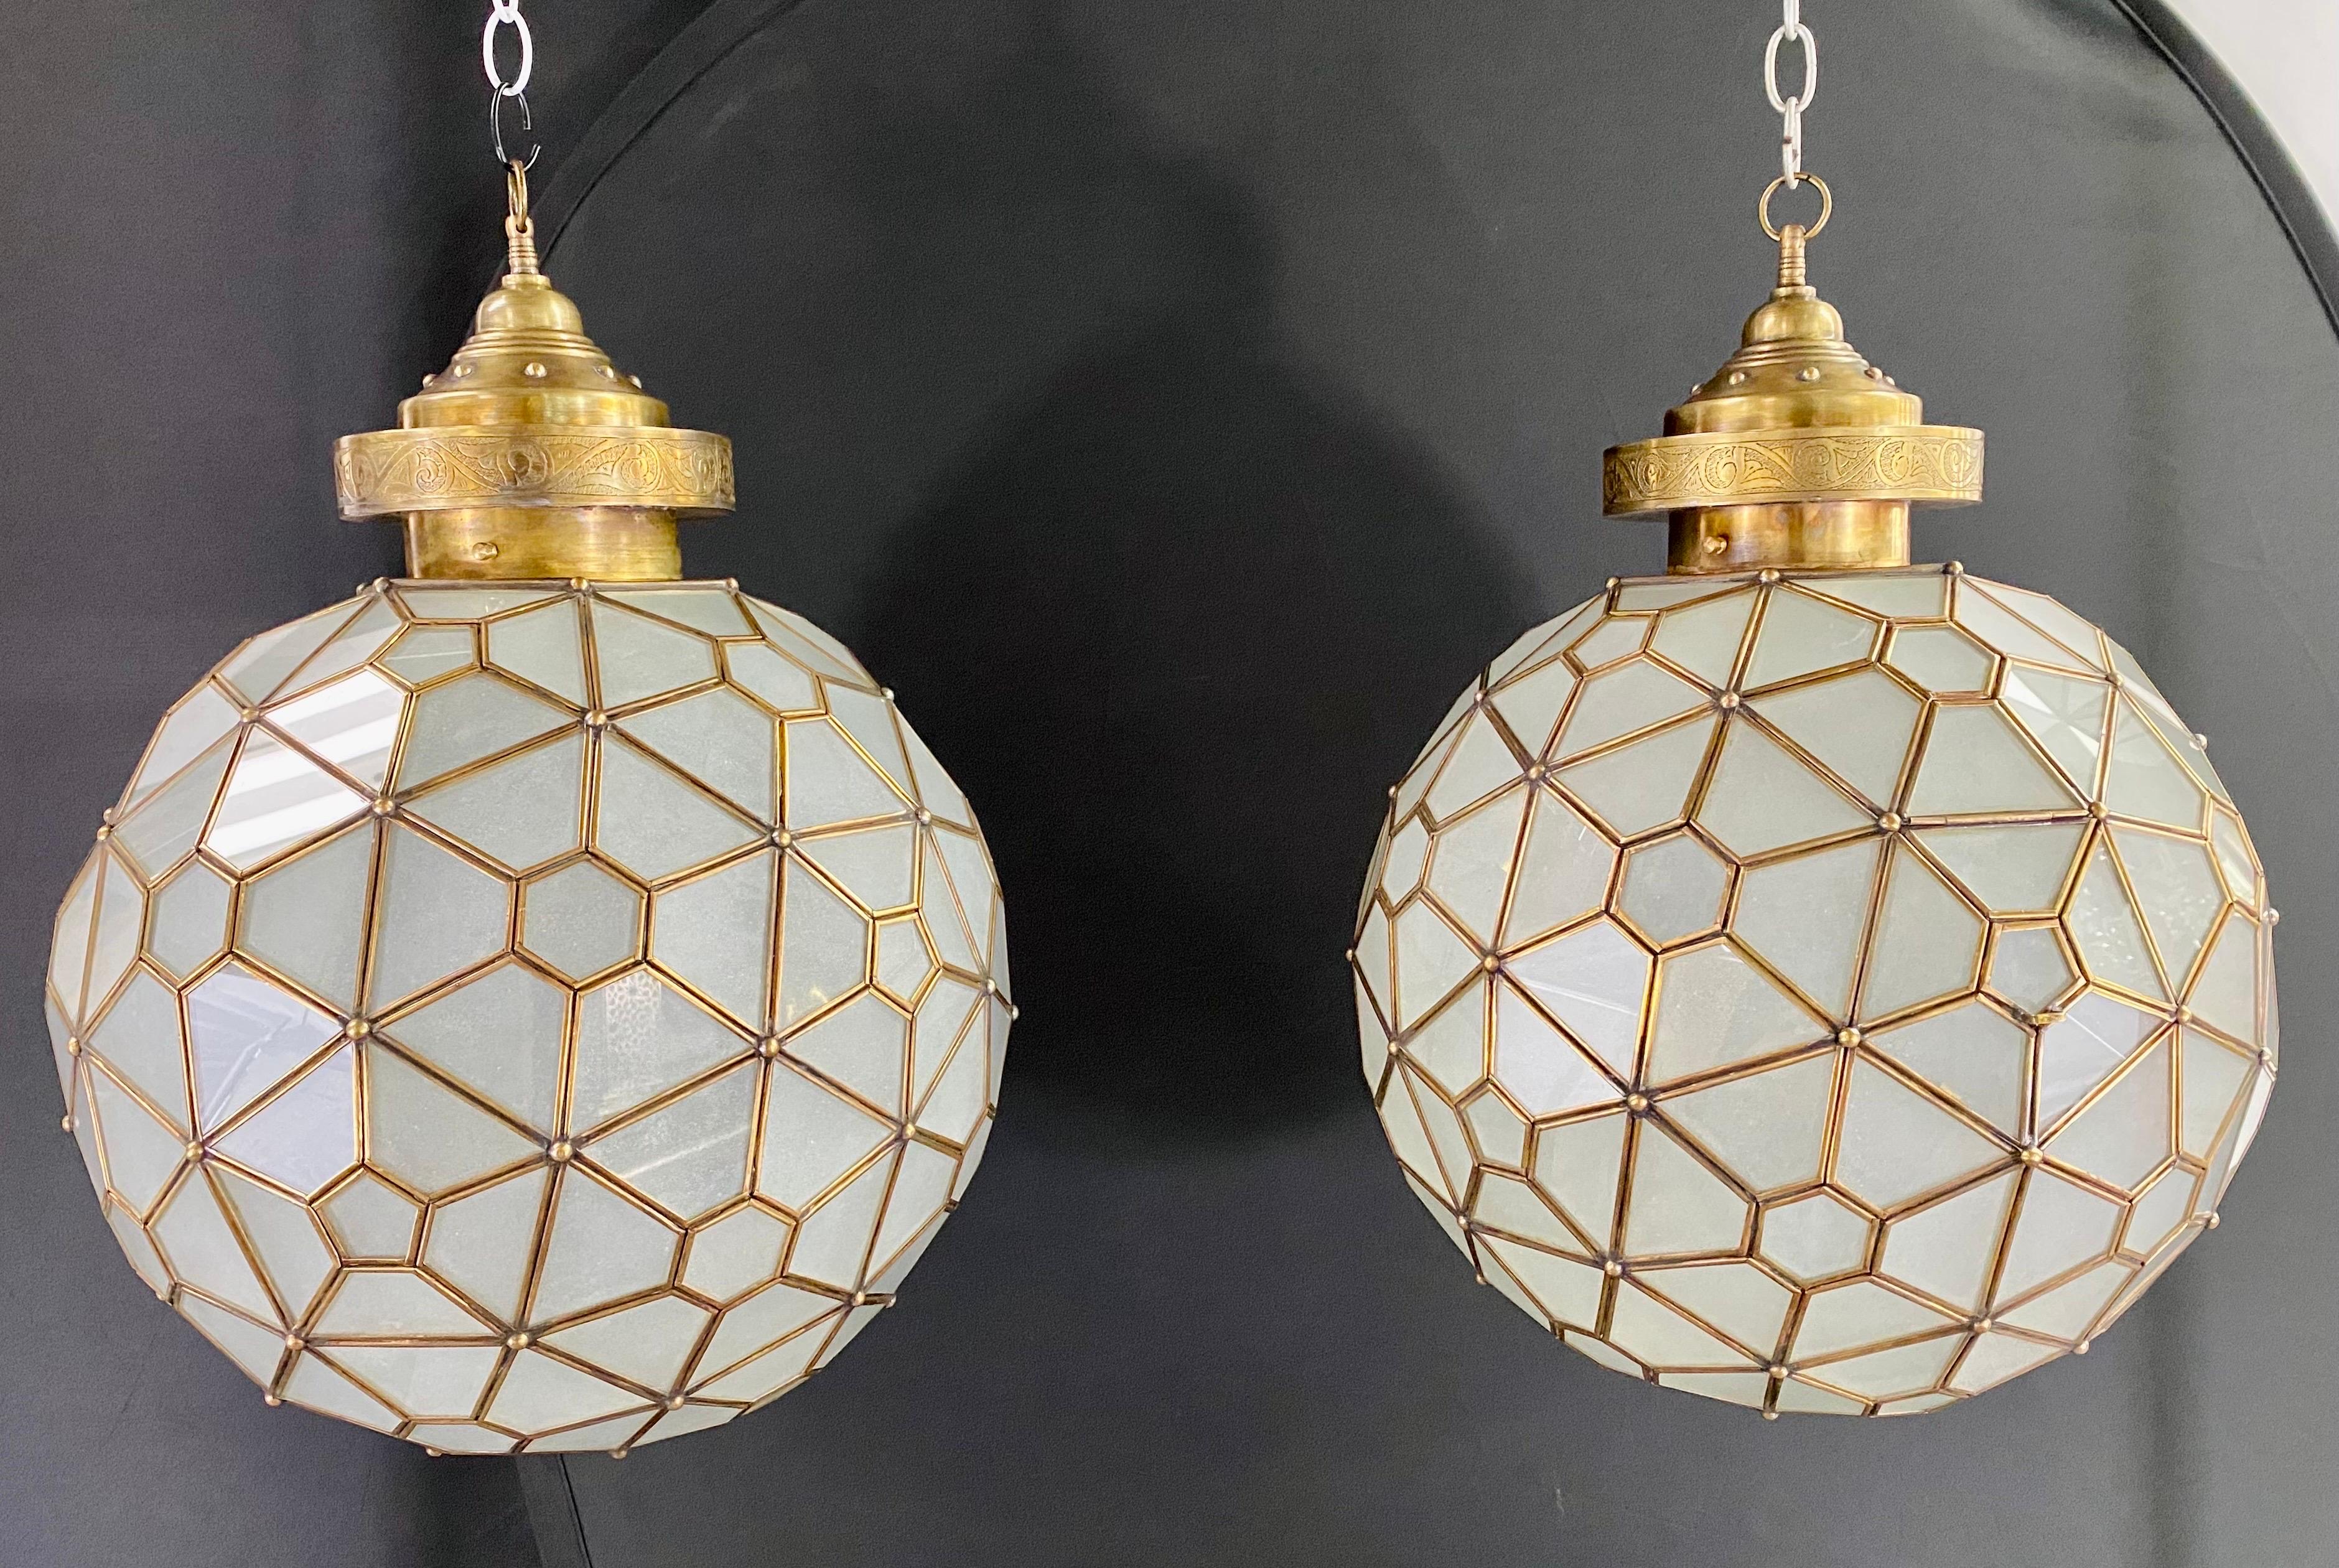 A pair of Art Deco style milk glass globe shape chandeliers, pendants or lanterns with brass inlay and handcrafted with a filigree design canopy. The stunning pendants are handmade using high quality brass and milk sanded glass and feature hexagonal